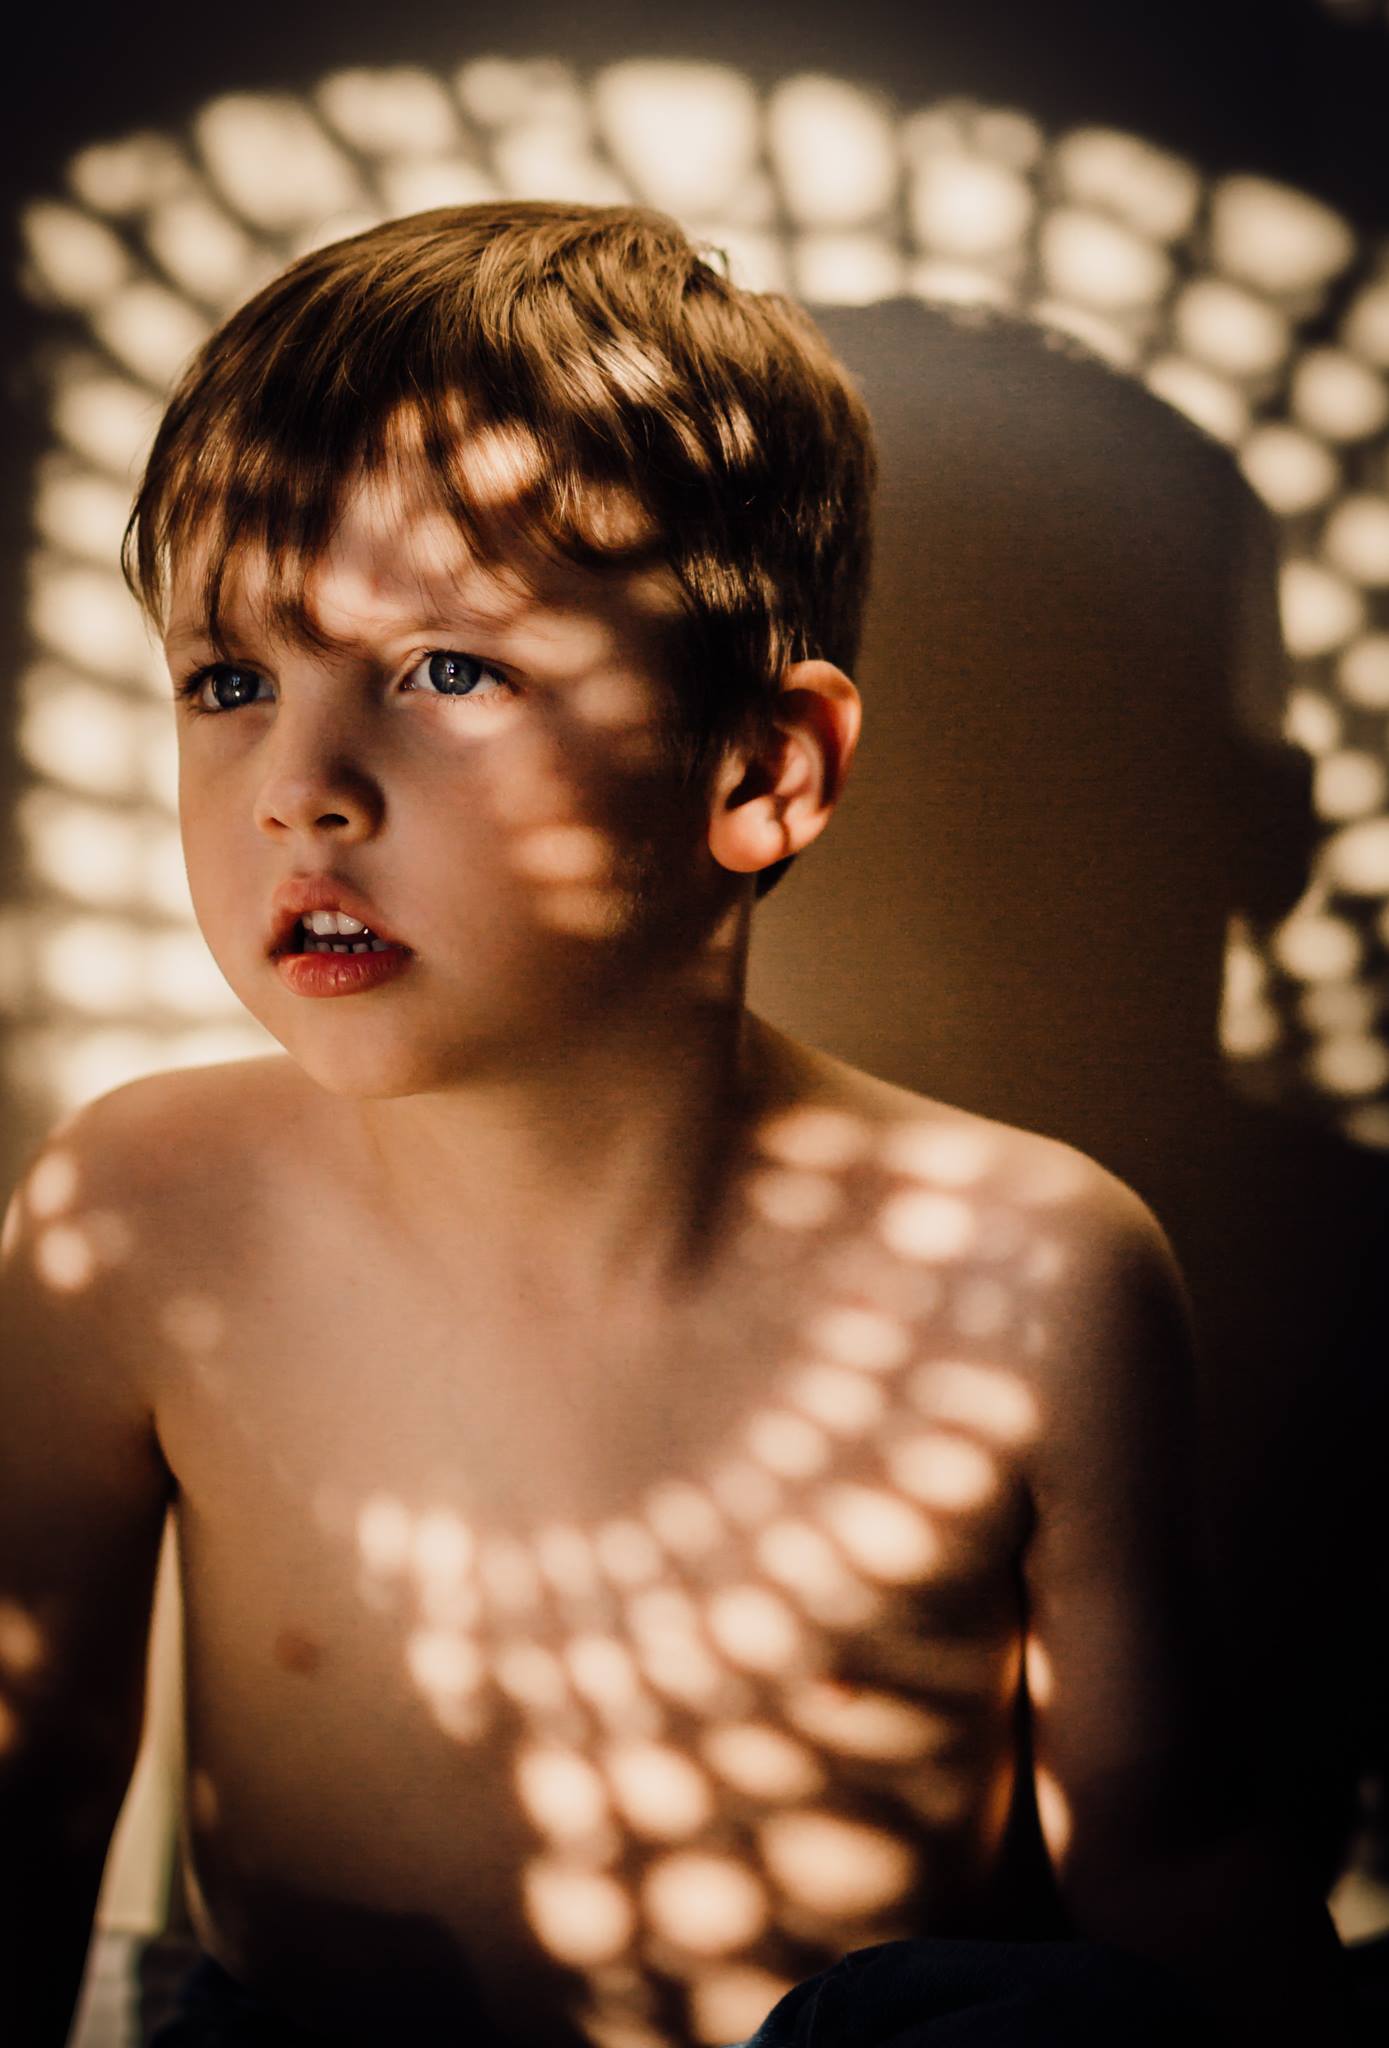  light and shadows over little boy